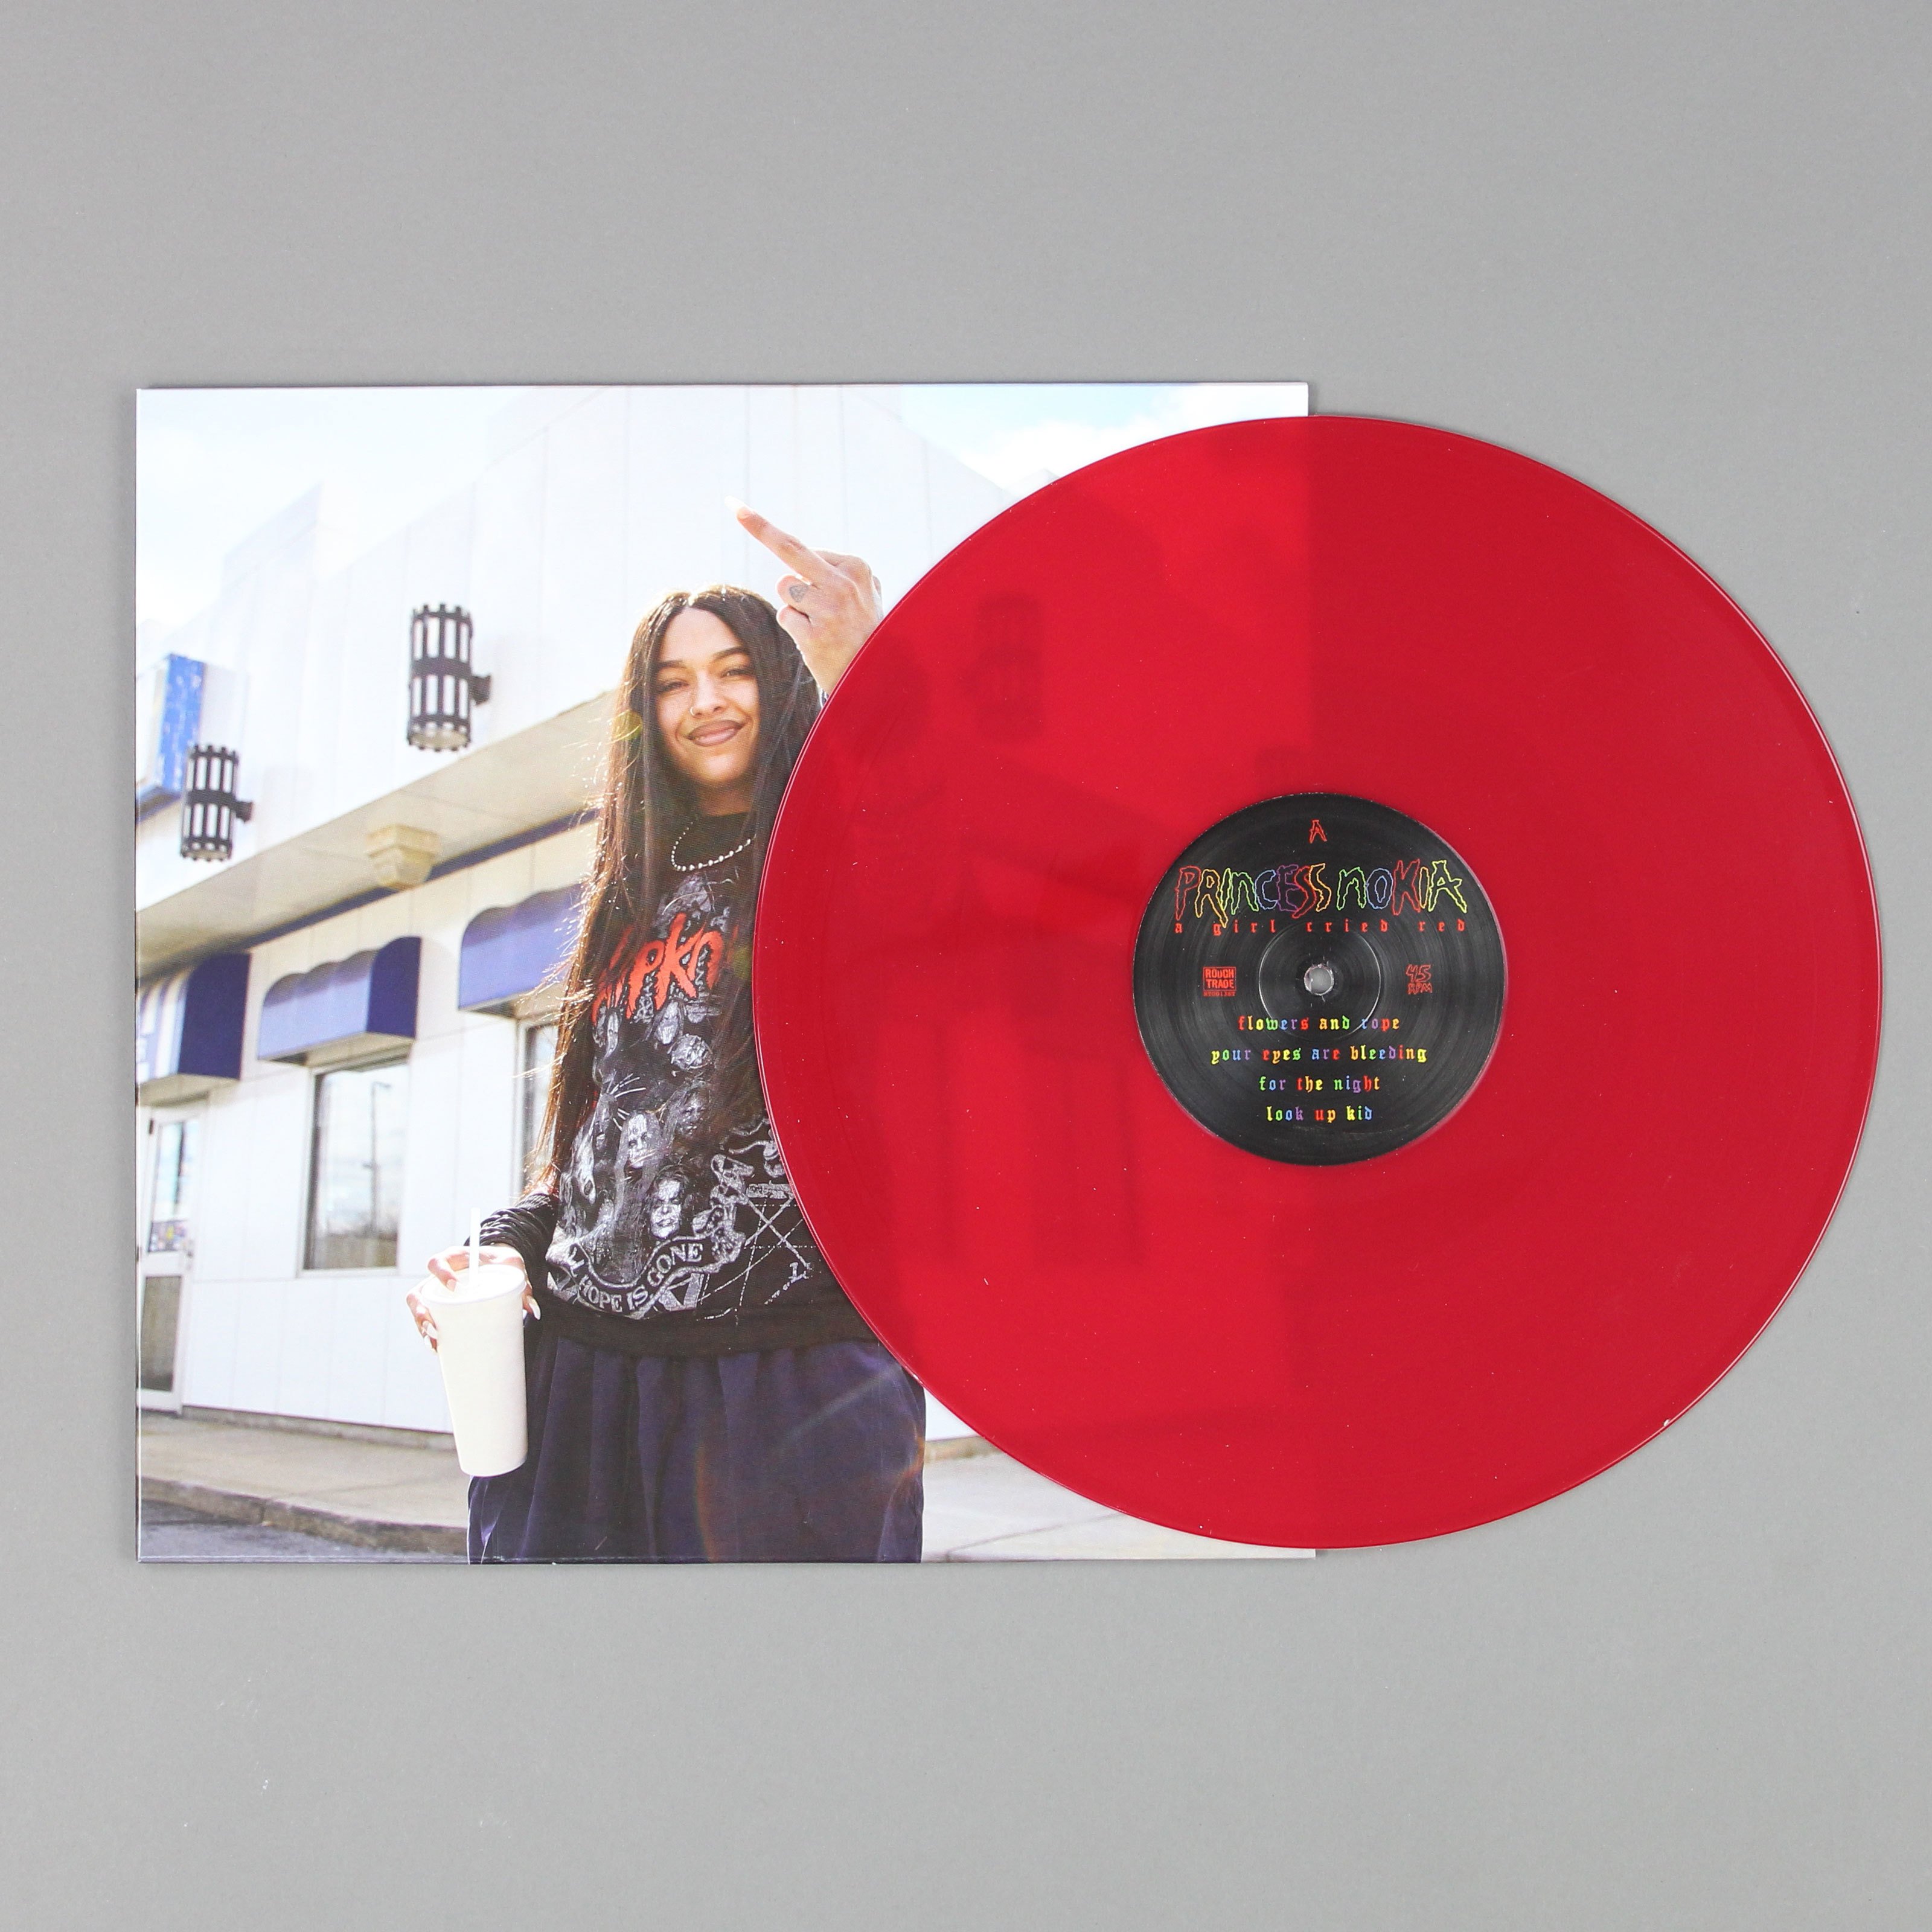 smuk loyalitet arrangere bleep on Twitter: "The new @princessnokia record "A Girl Cried Red" on red  vinyl is shipping this week on @RoughTradeRecs. Nokia bridges the gap  between the worlds of rock and rap, and